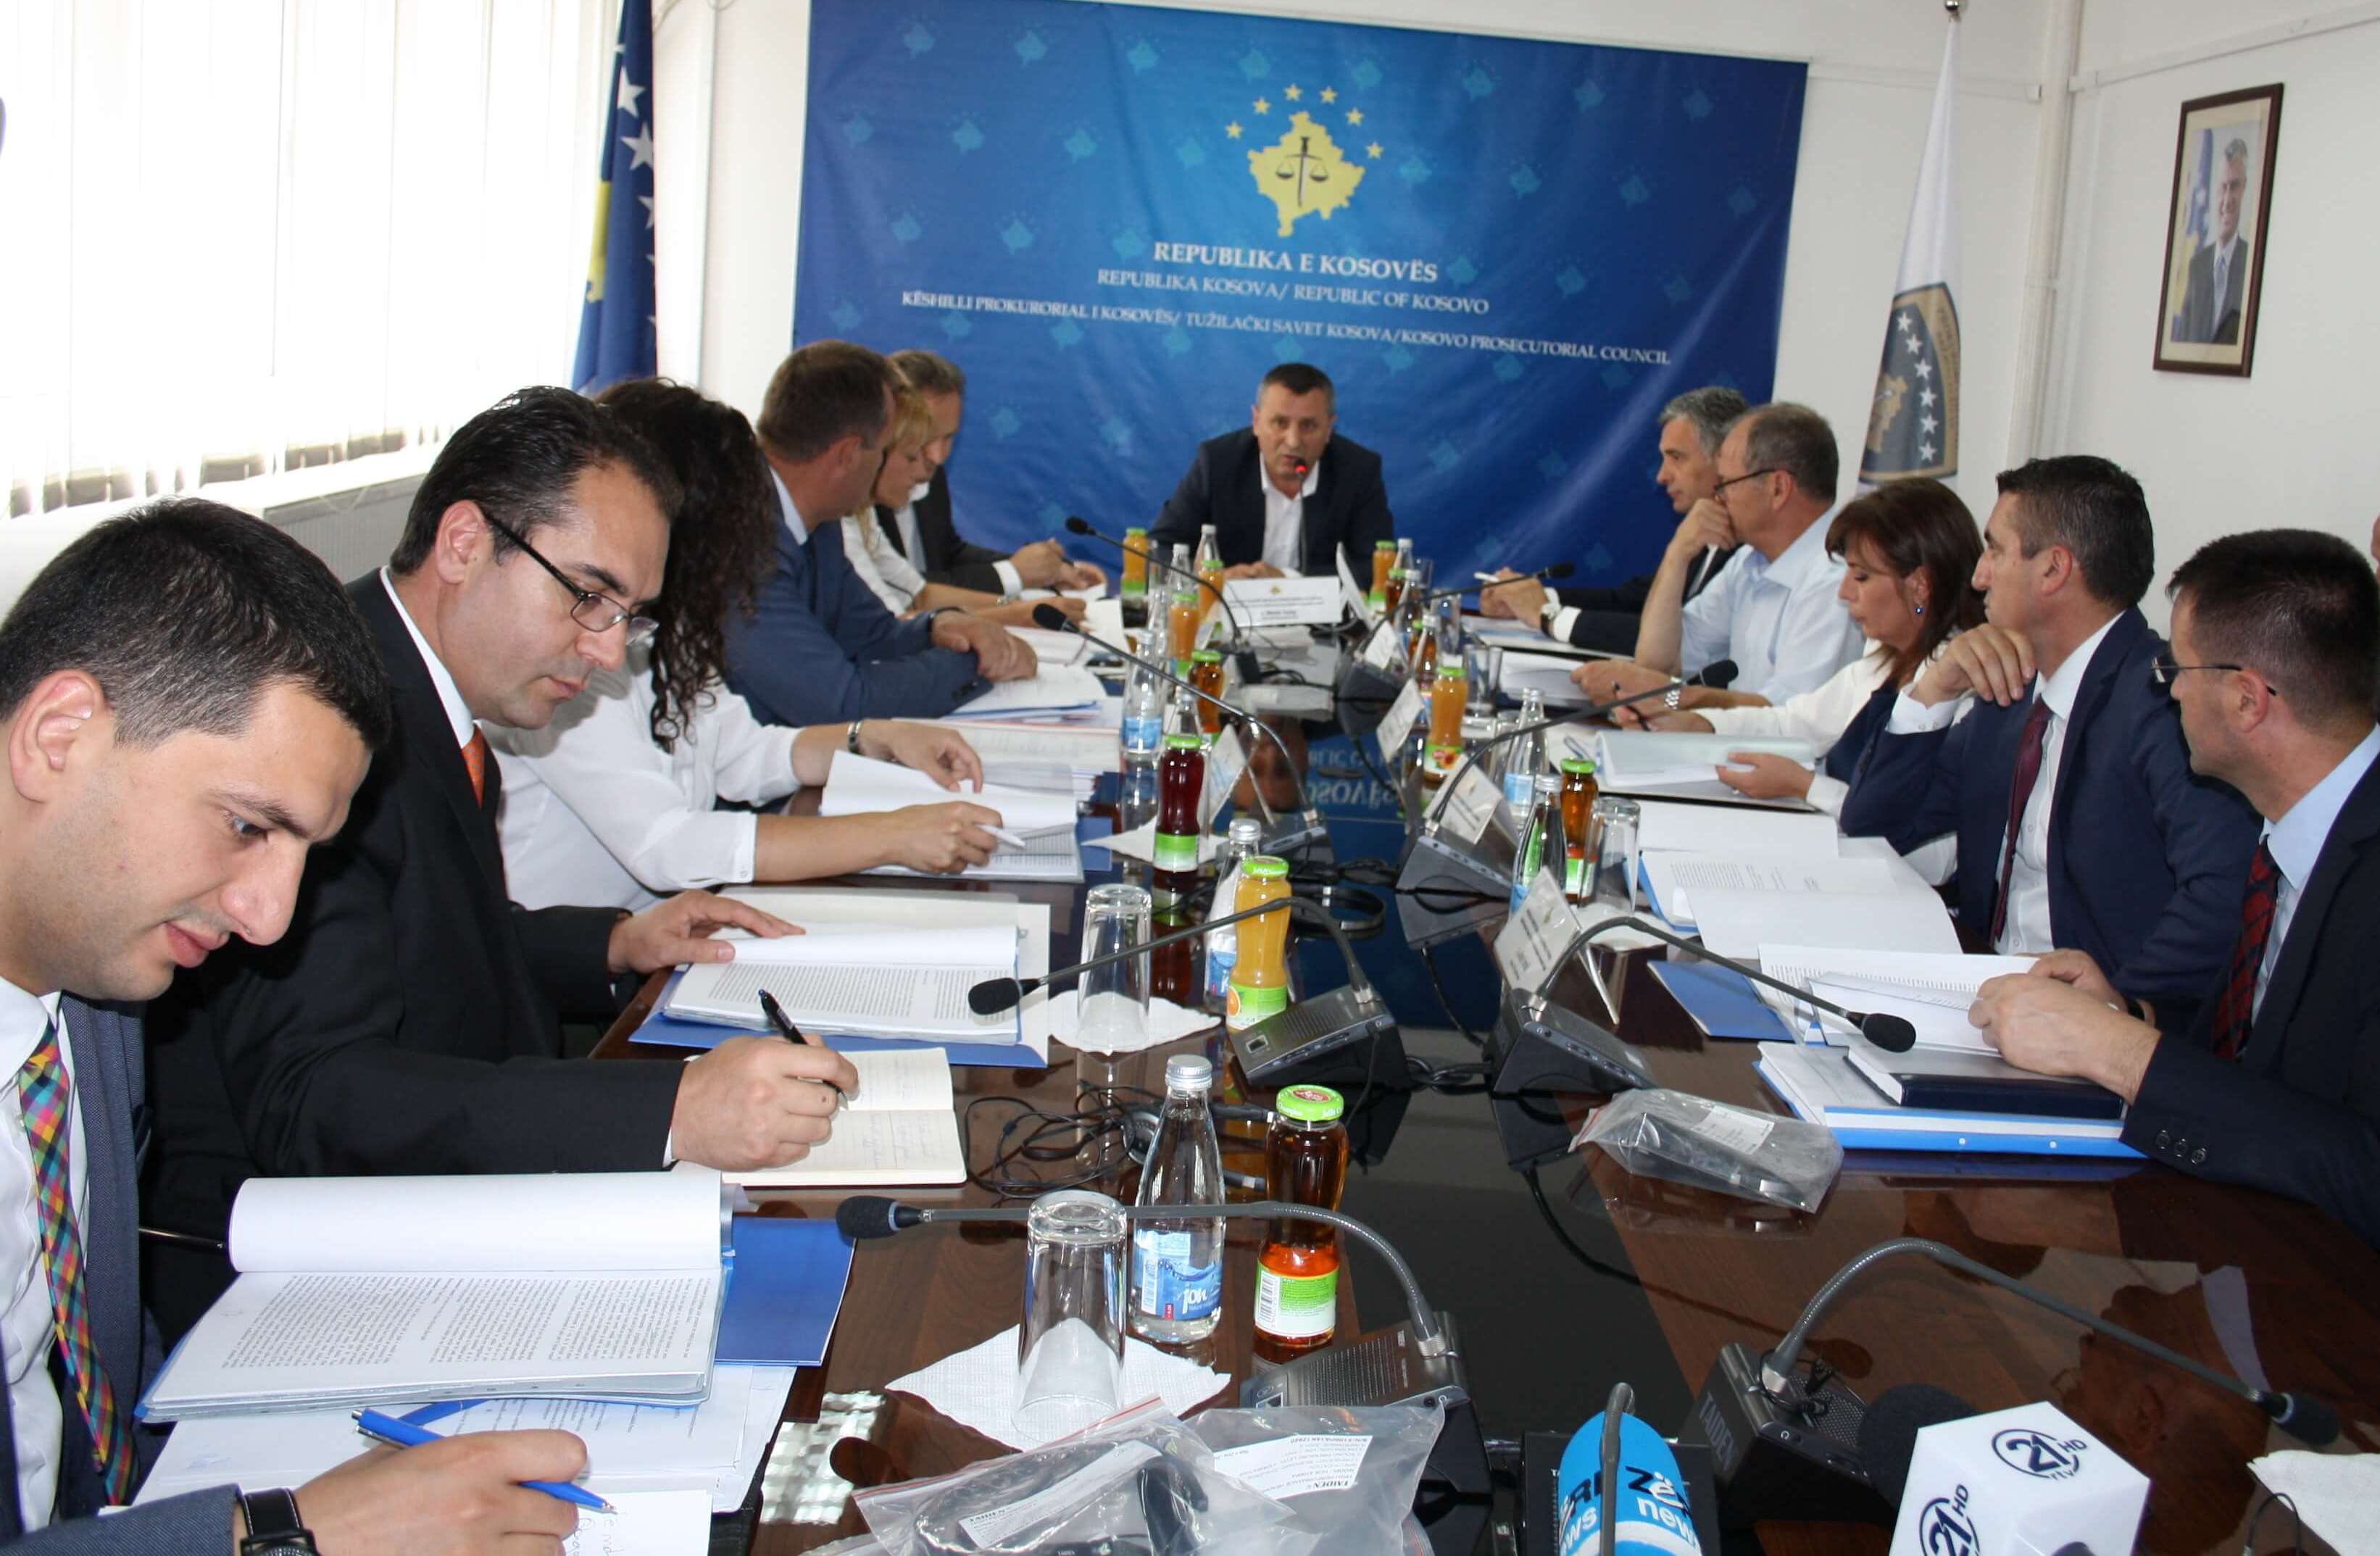 There was held the next meeting of Kosovo Prosecutorial Council